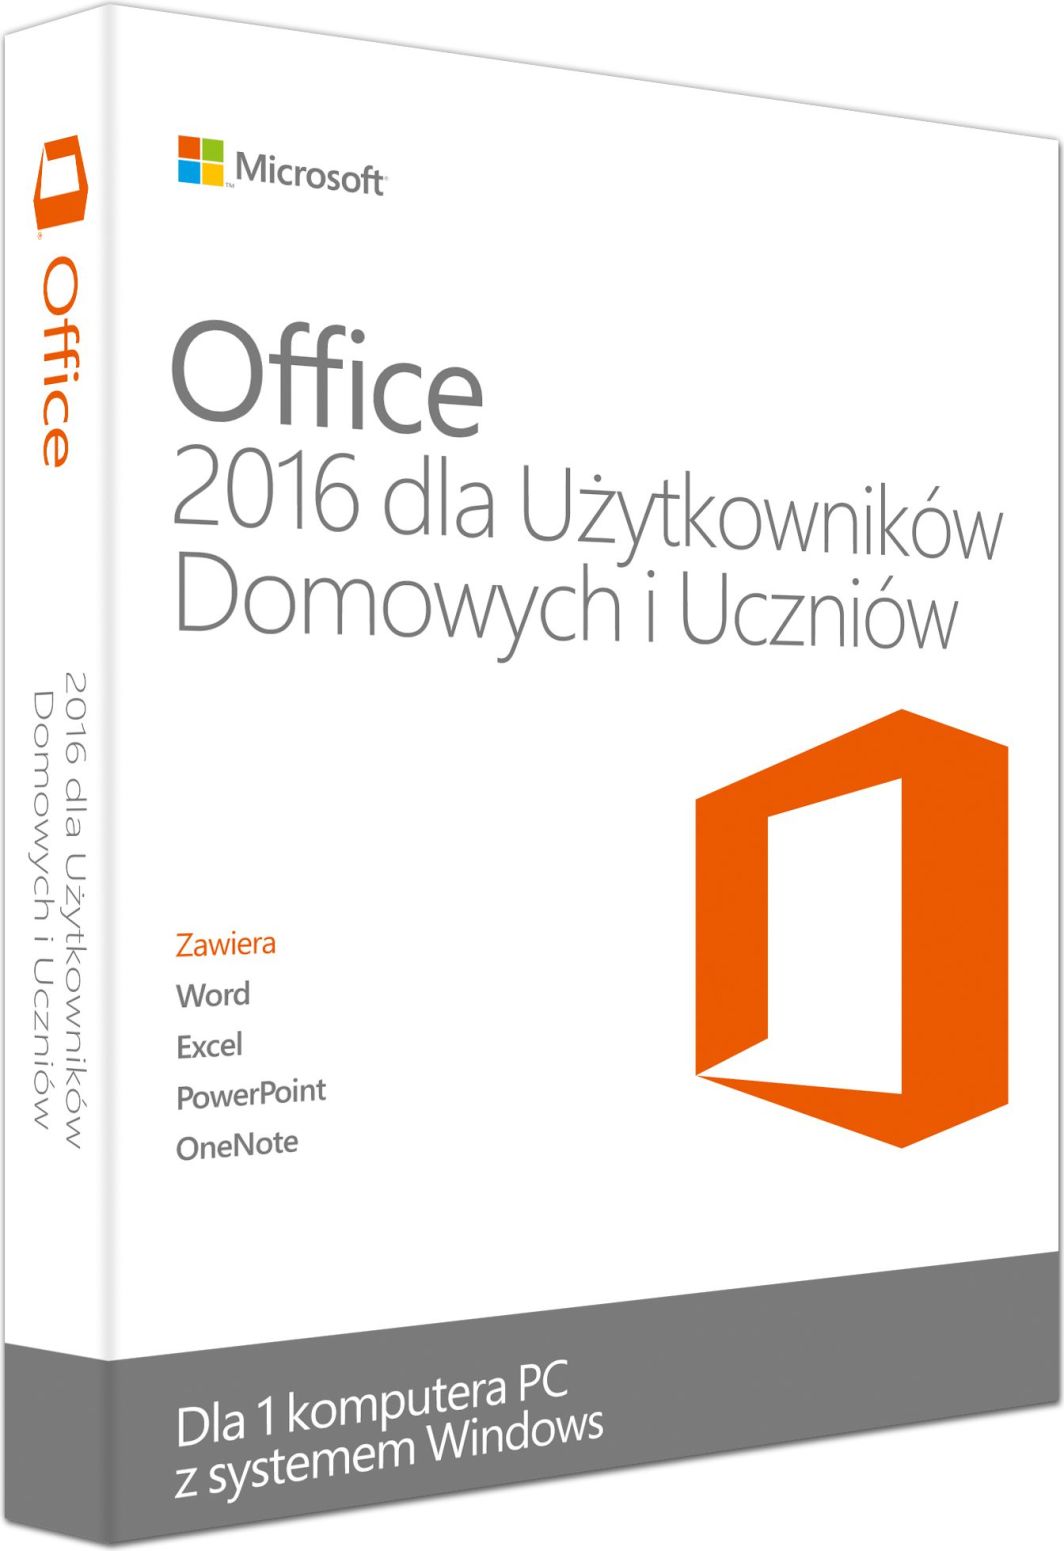 how to reinstall office 2016 in 32 bit